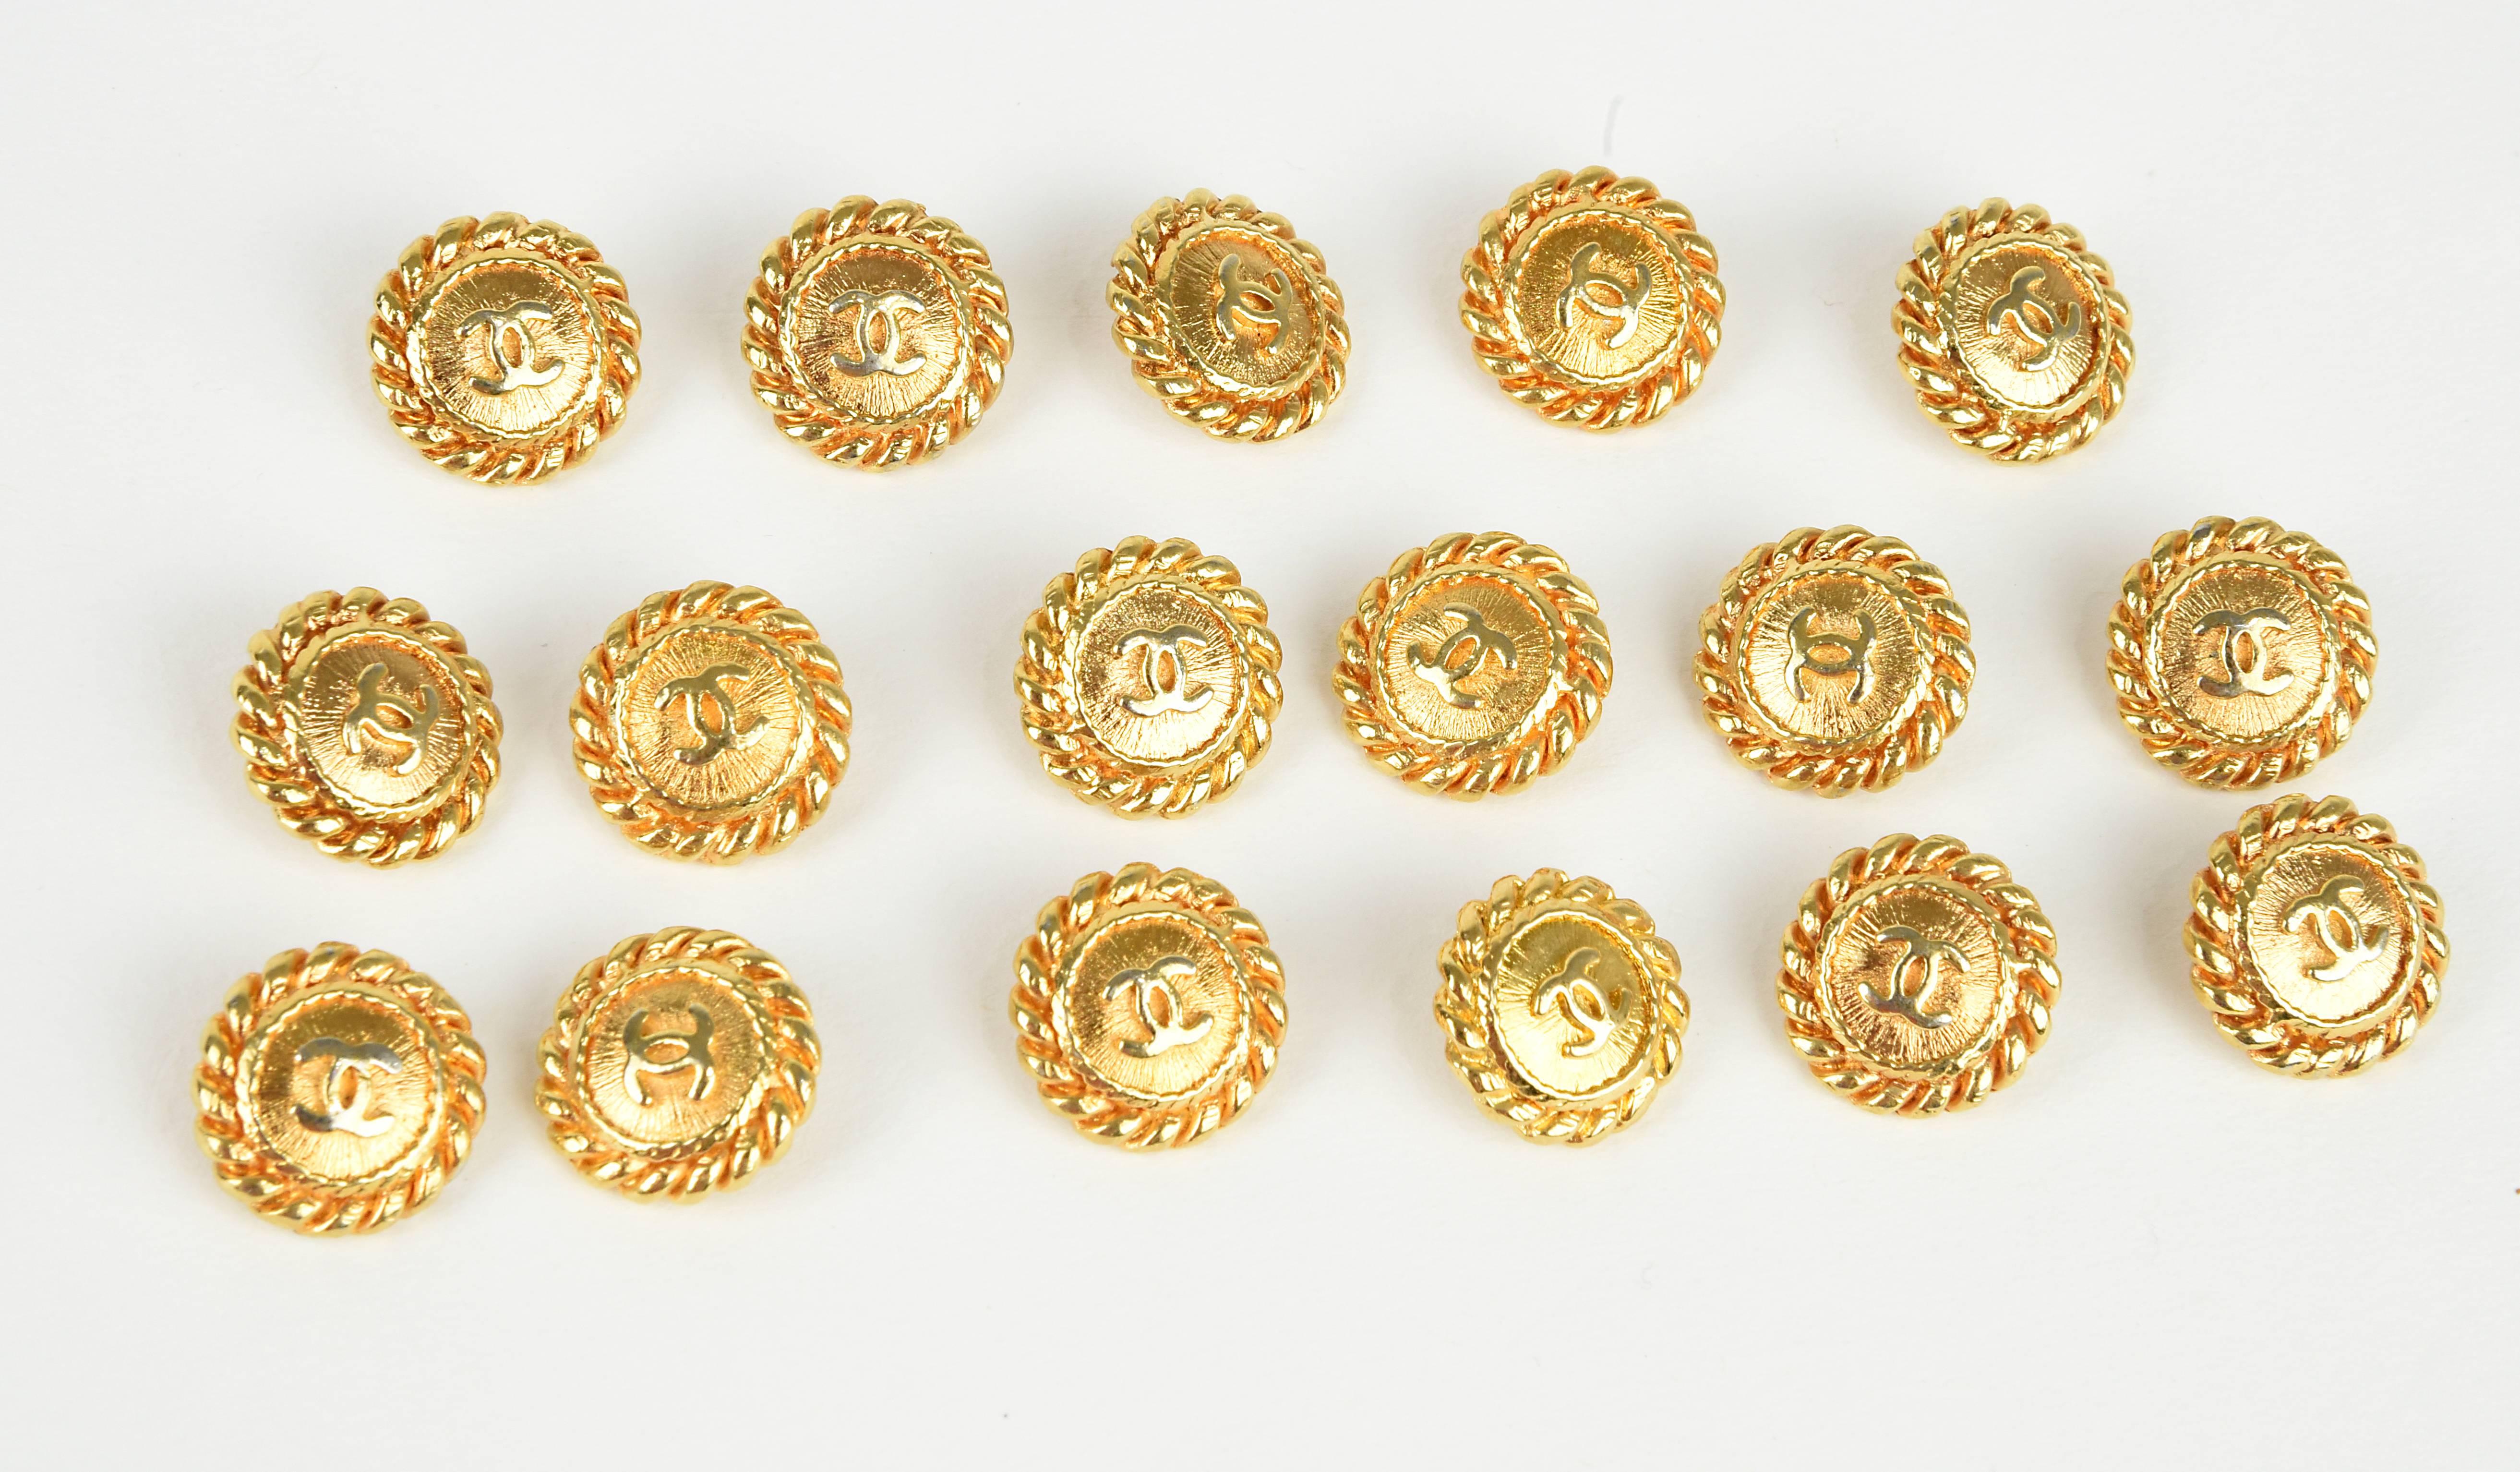 Chanel design collections are always defined by the buttons.  Here we have one of the most classical designs of a sunburst background behind raised CC's and surrounded by a lovely rope design edge. Unusual collection of 17 buttons.  Measurement: 